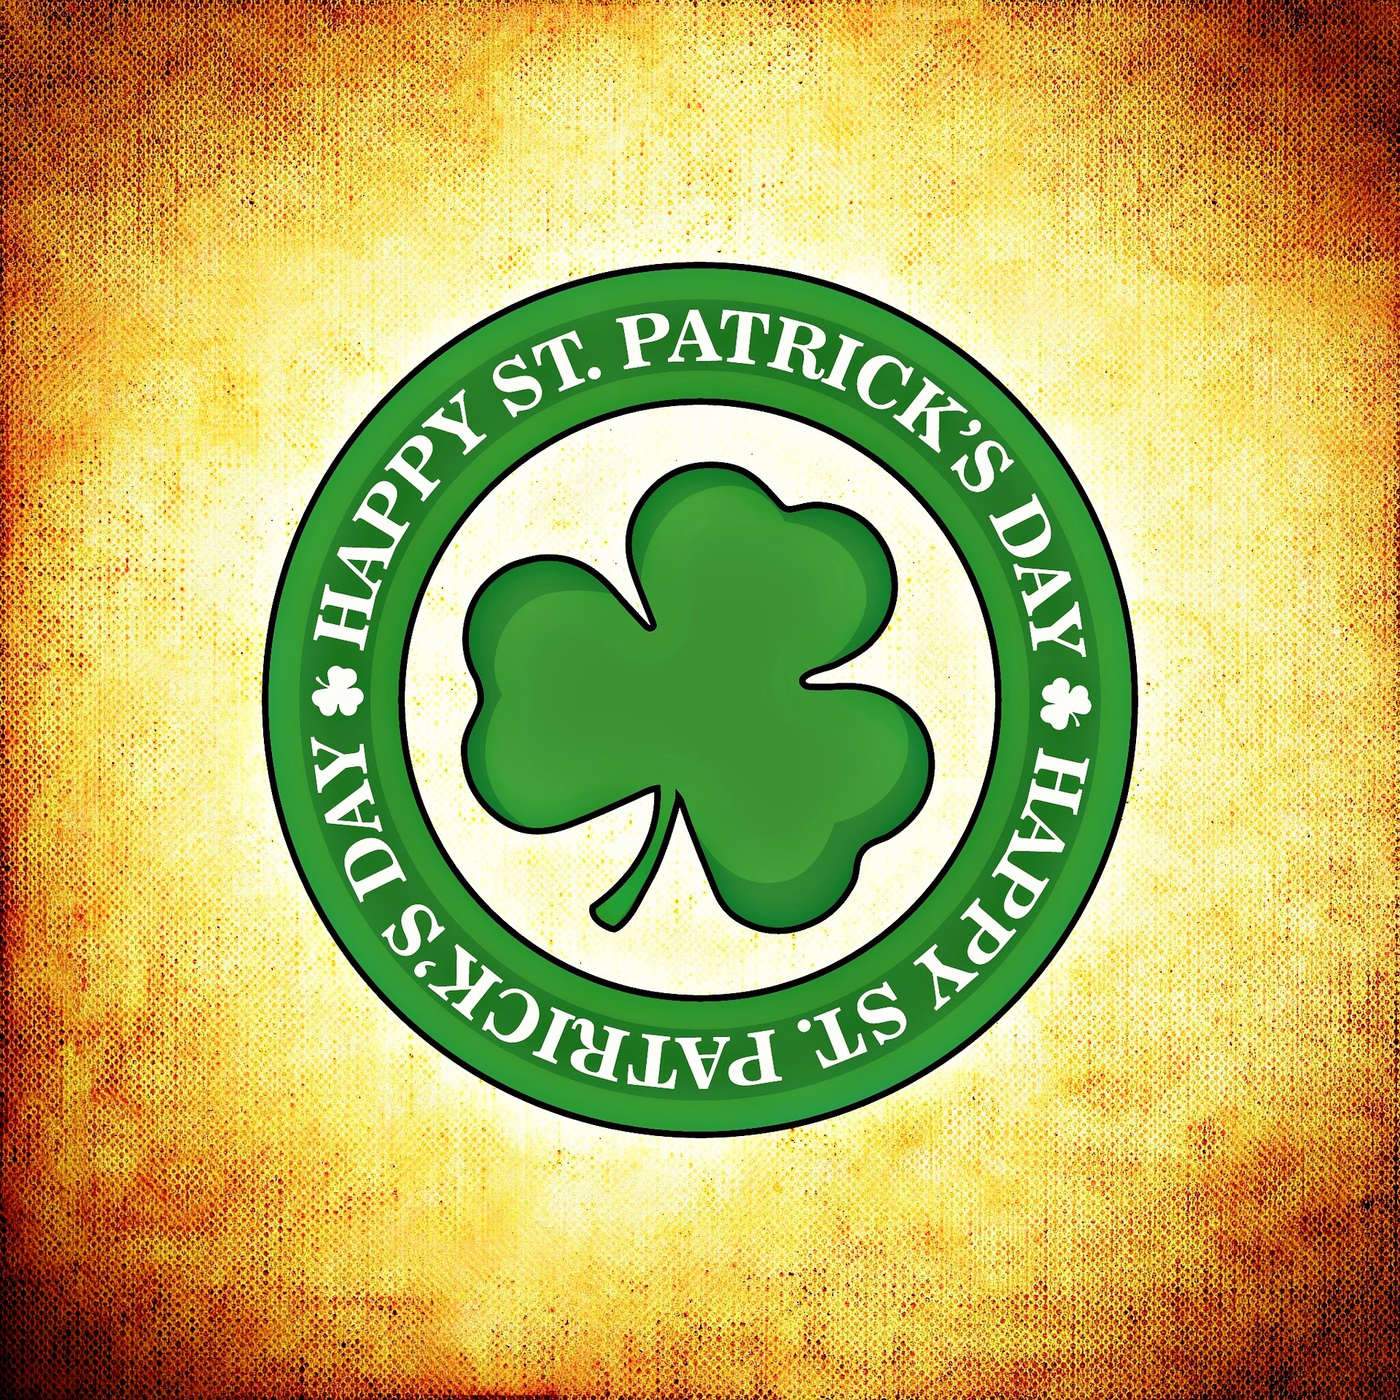 What to do on St. Patrick’s Day